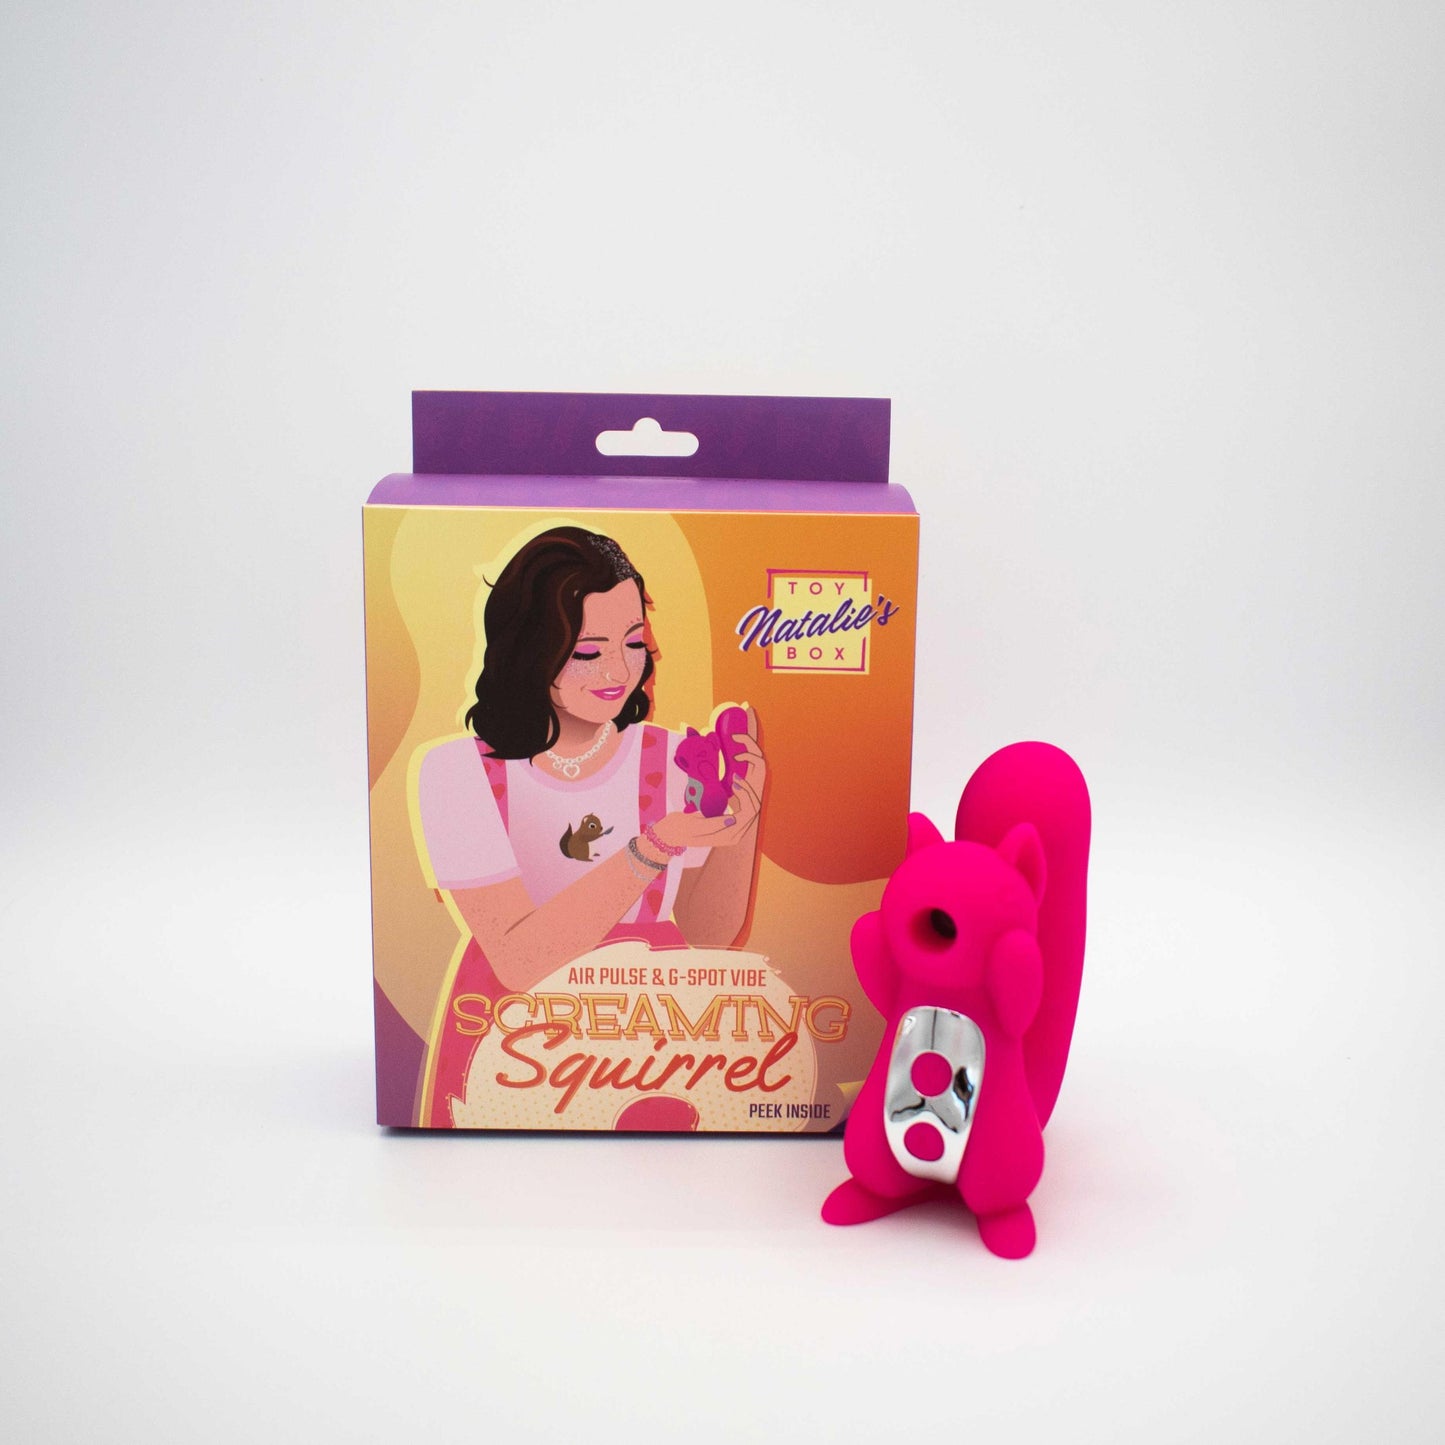 Screaming Squirrel Air Pulse and G-Spot Vibrator - Pink